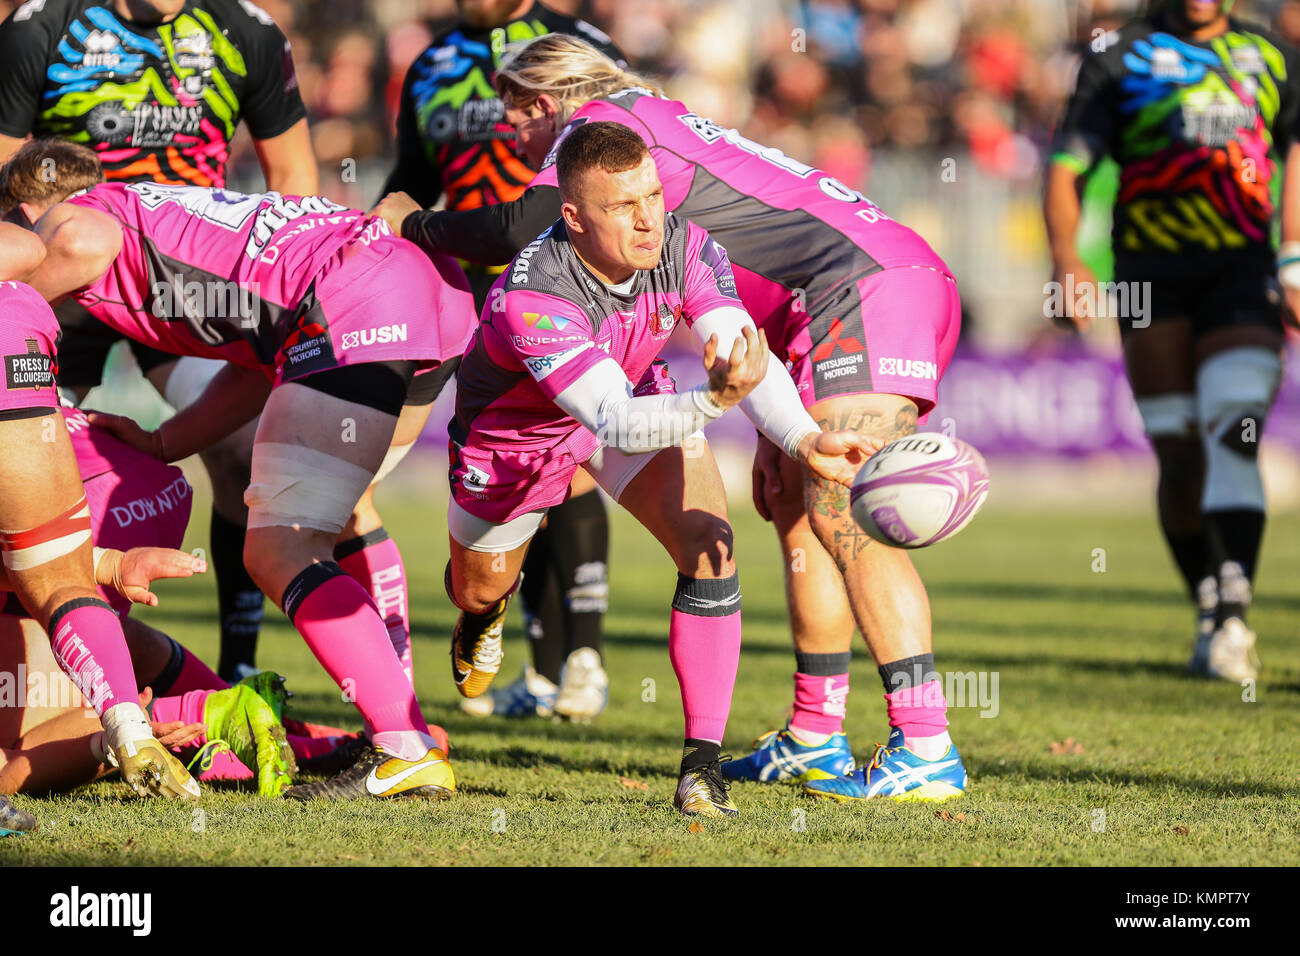 Parma, Italy. 9h December 2017. Gloucester's scrum half Ben Vellacott passes the ball in the match against Zebre in EPCR Challenge Cup 2017/18. Massimiliano Carnabuci/Alamy Live News Stock Photo